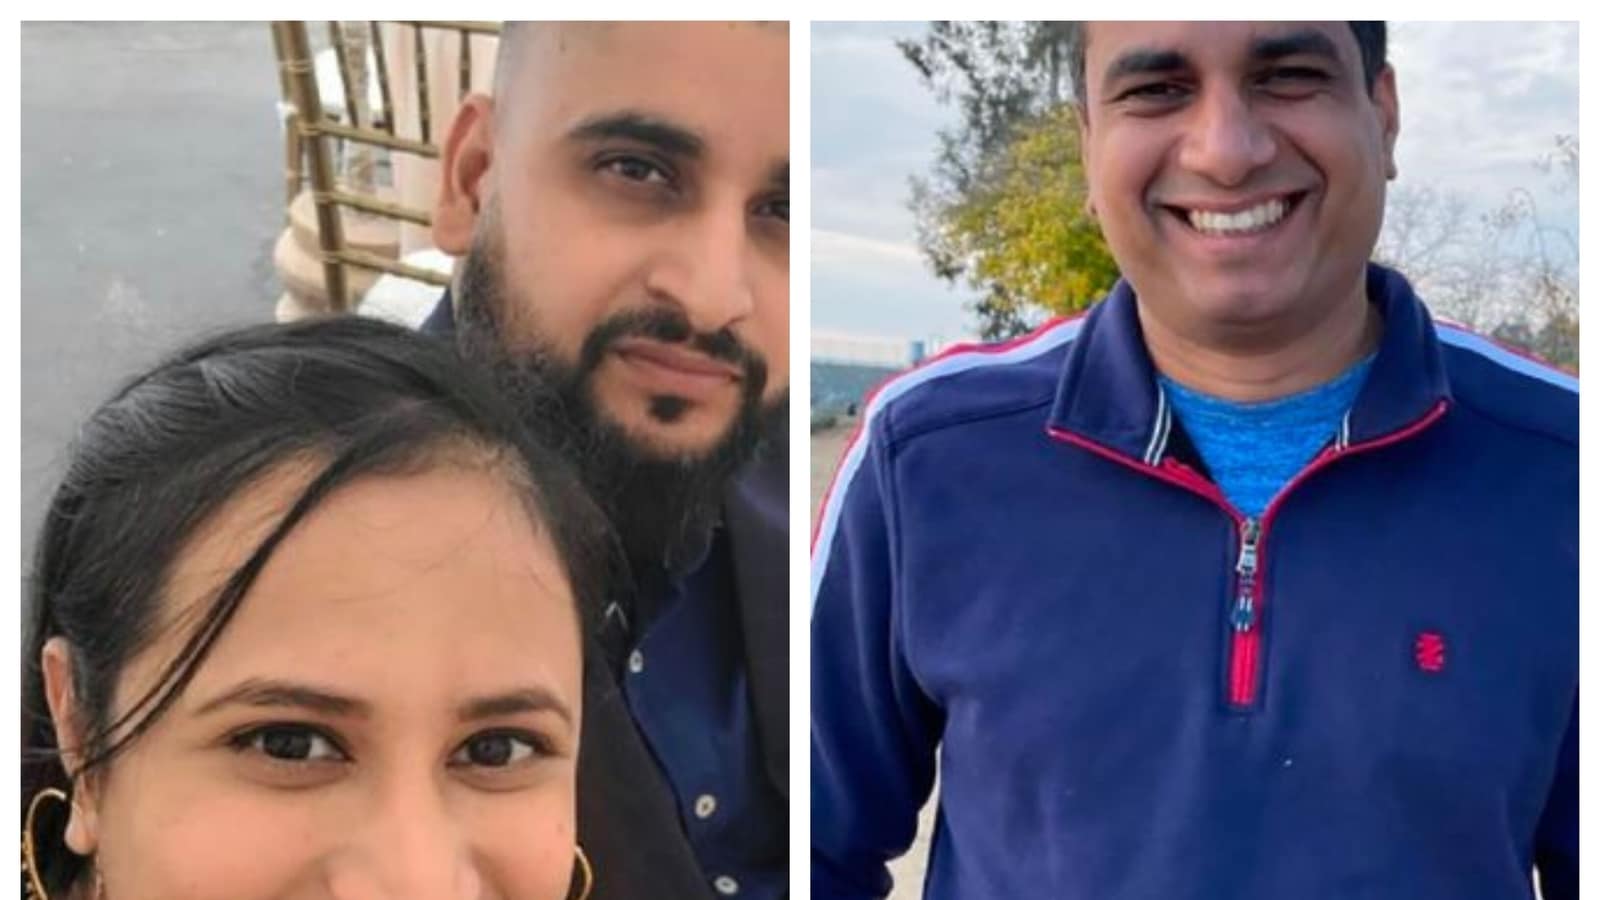 Kibnap India Xxx - Indian-origin family of 4 who were kidnapped found dead in California |  Latest News India - Hindustan Times